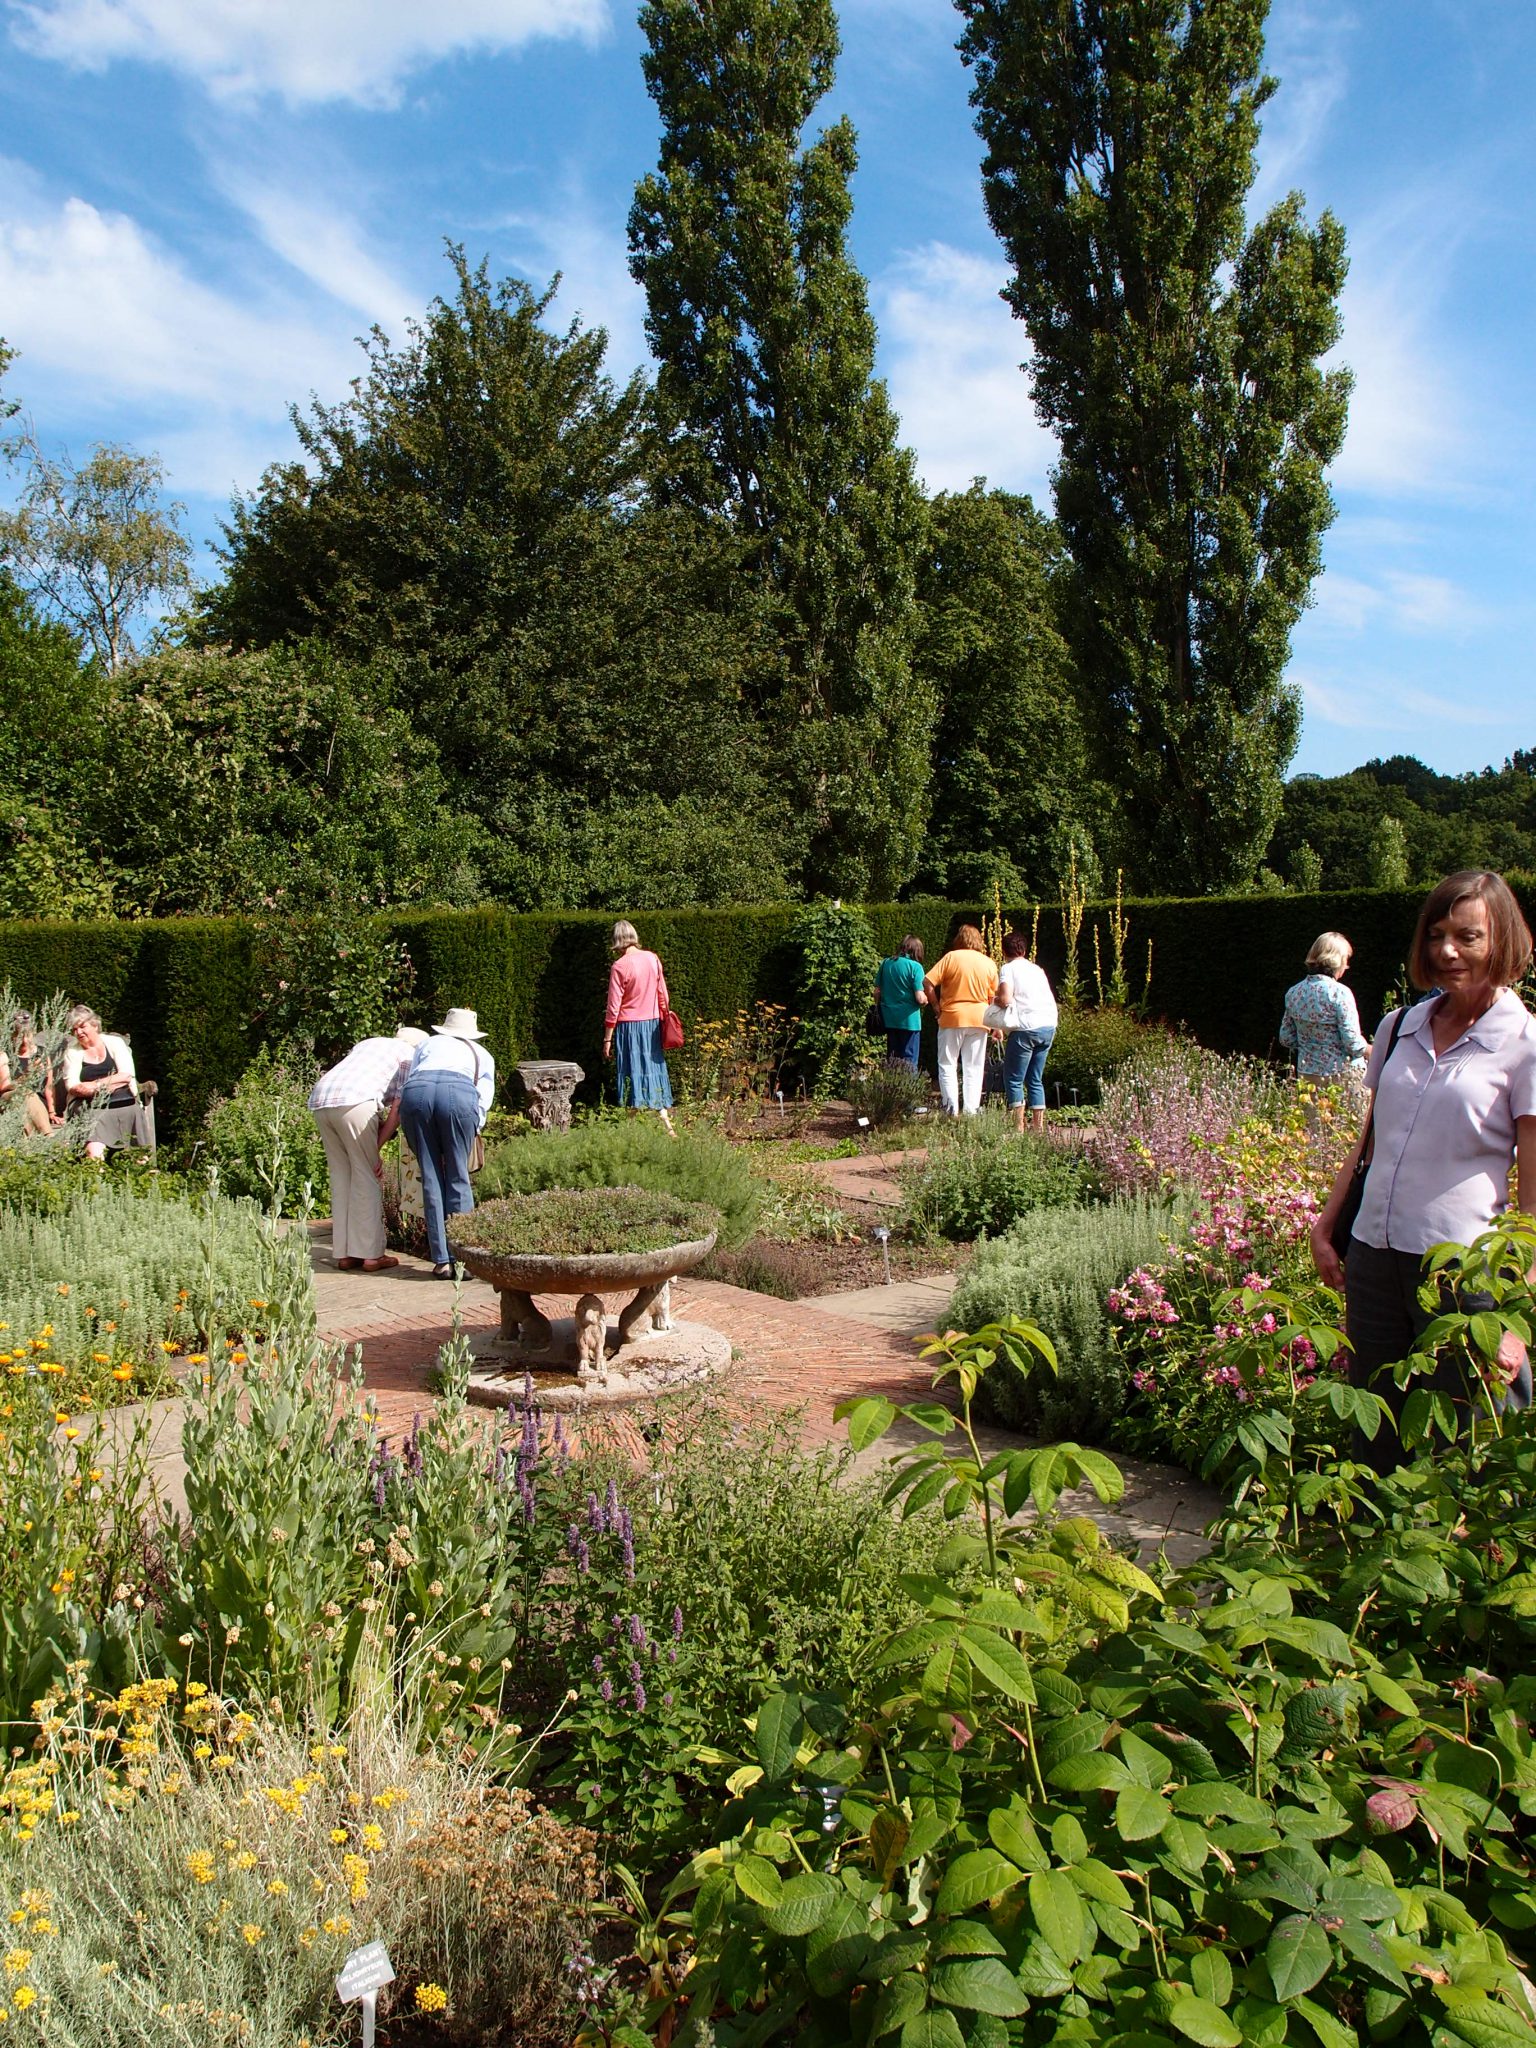 The modestly-sized Herb Garden, which contains 160 different varieties of herbs.